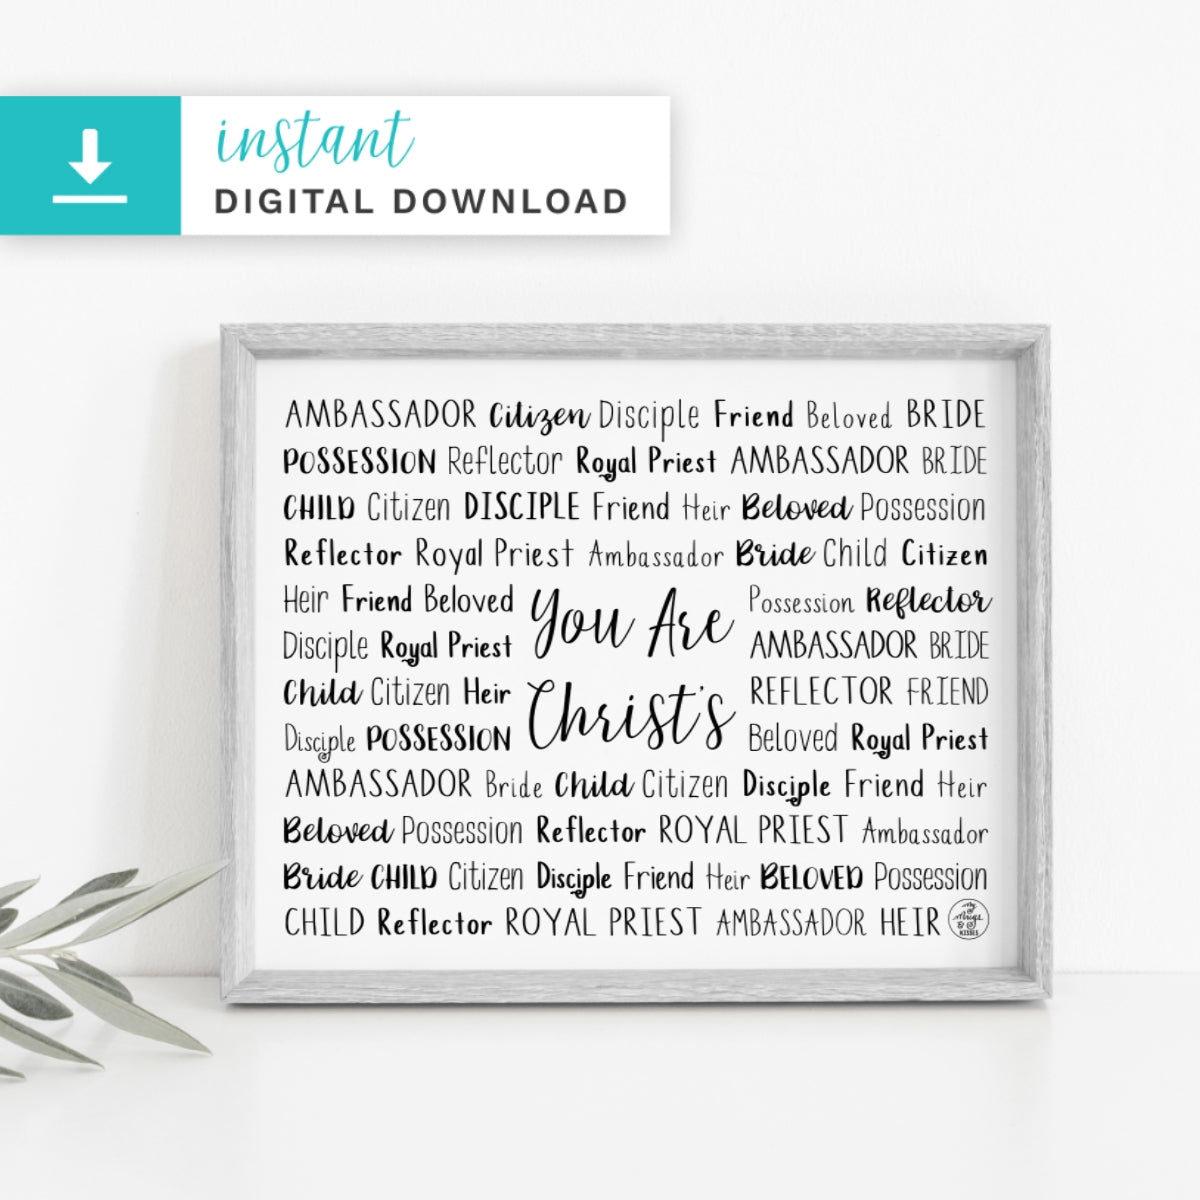 You Are Christ's Digital Download